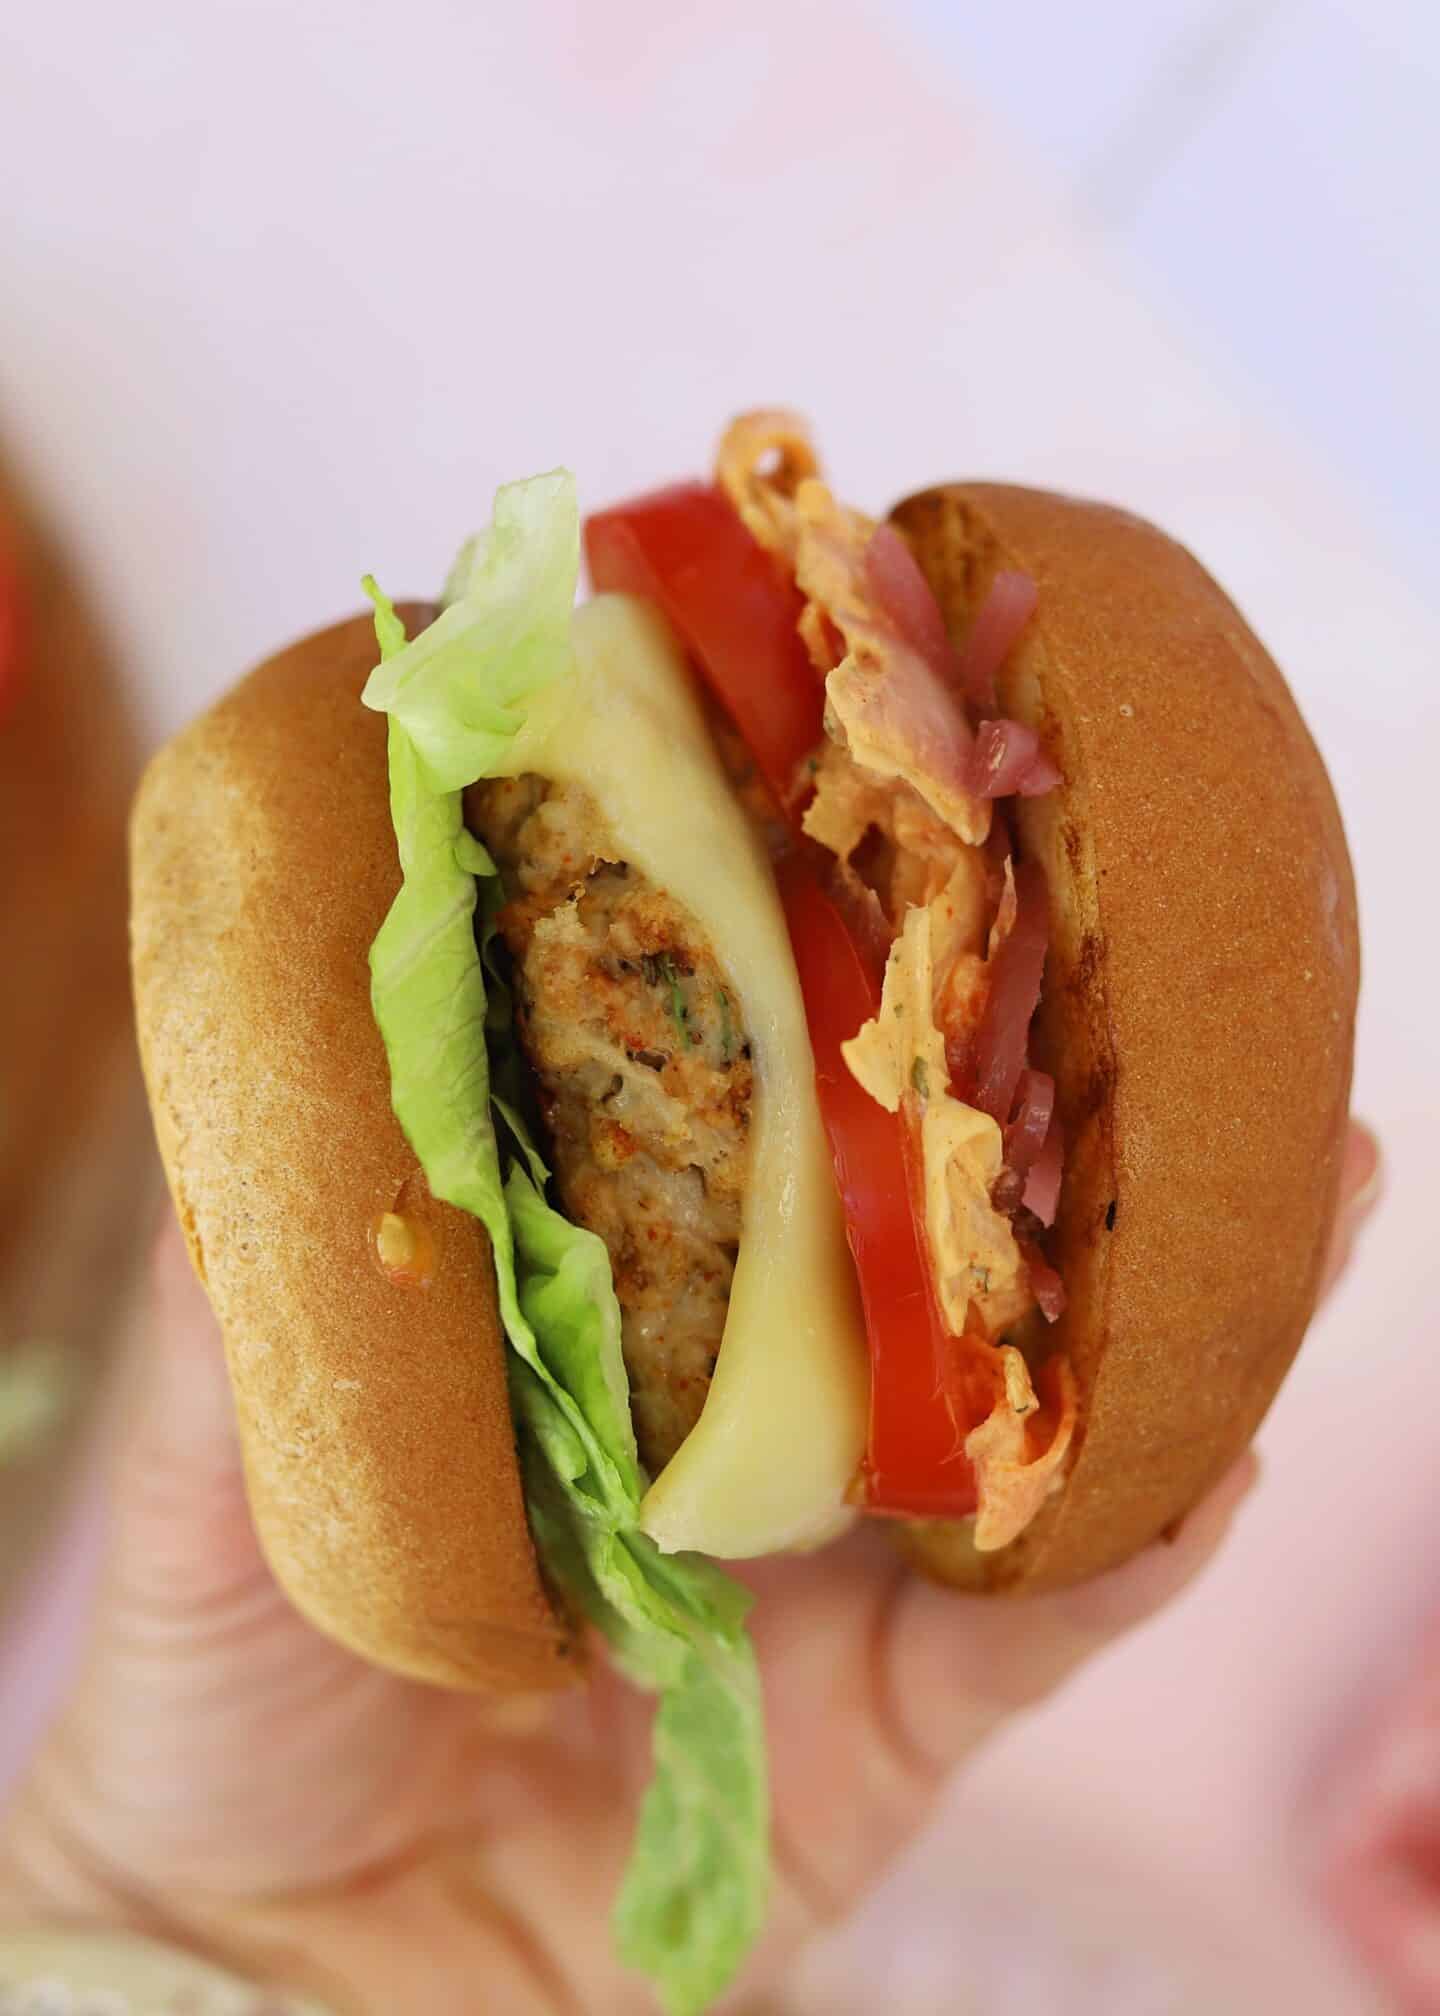 A gluten free ground chicken burger in a bun with lettuce, tomato and cheese.